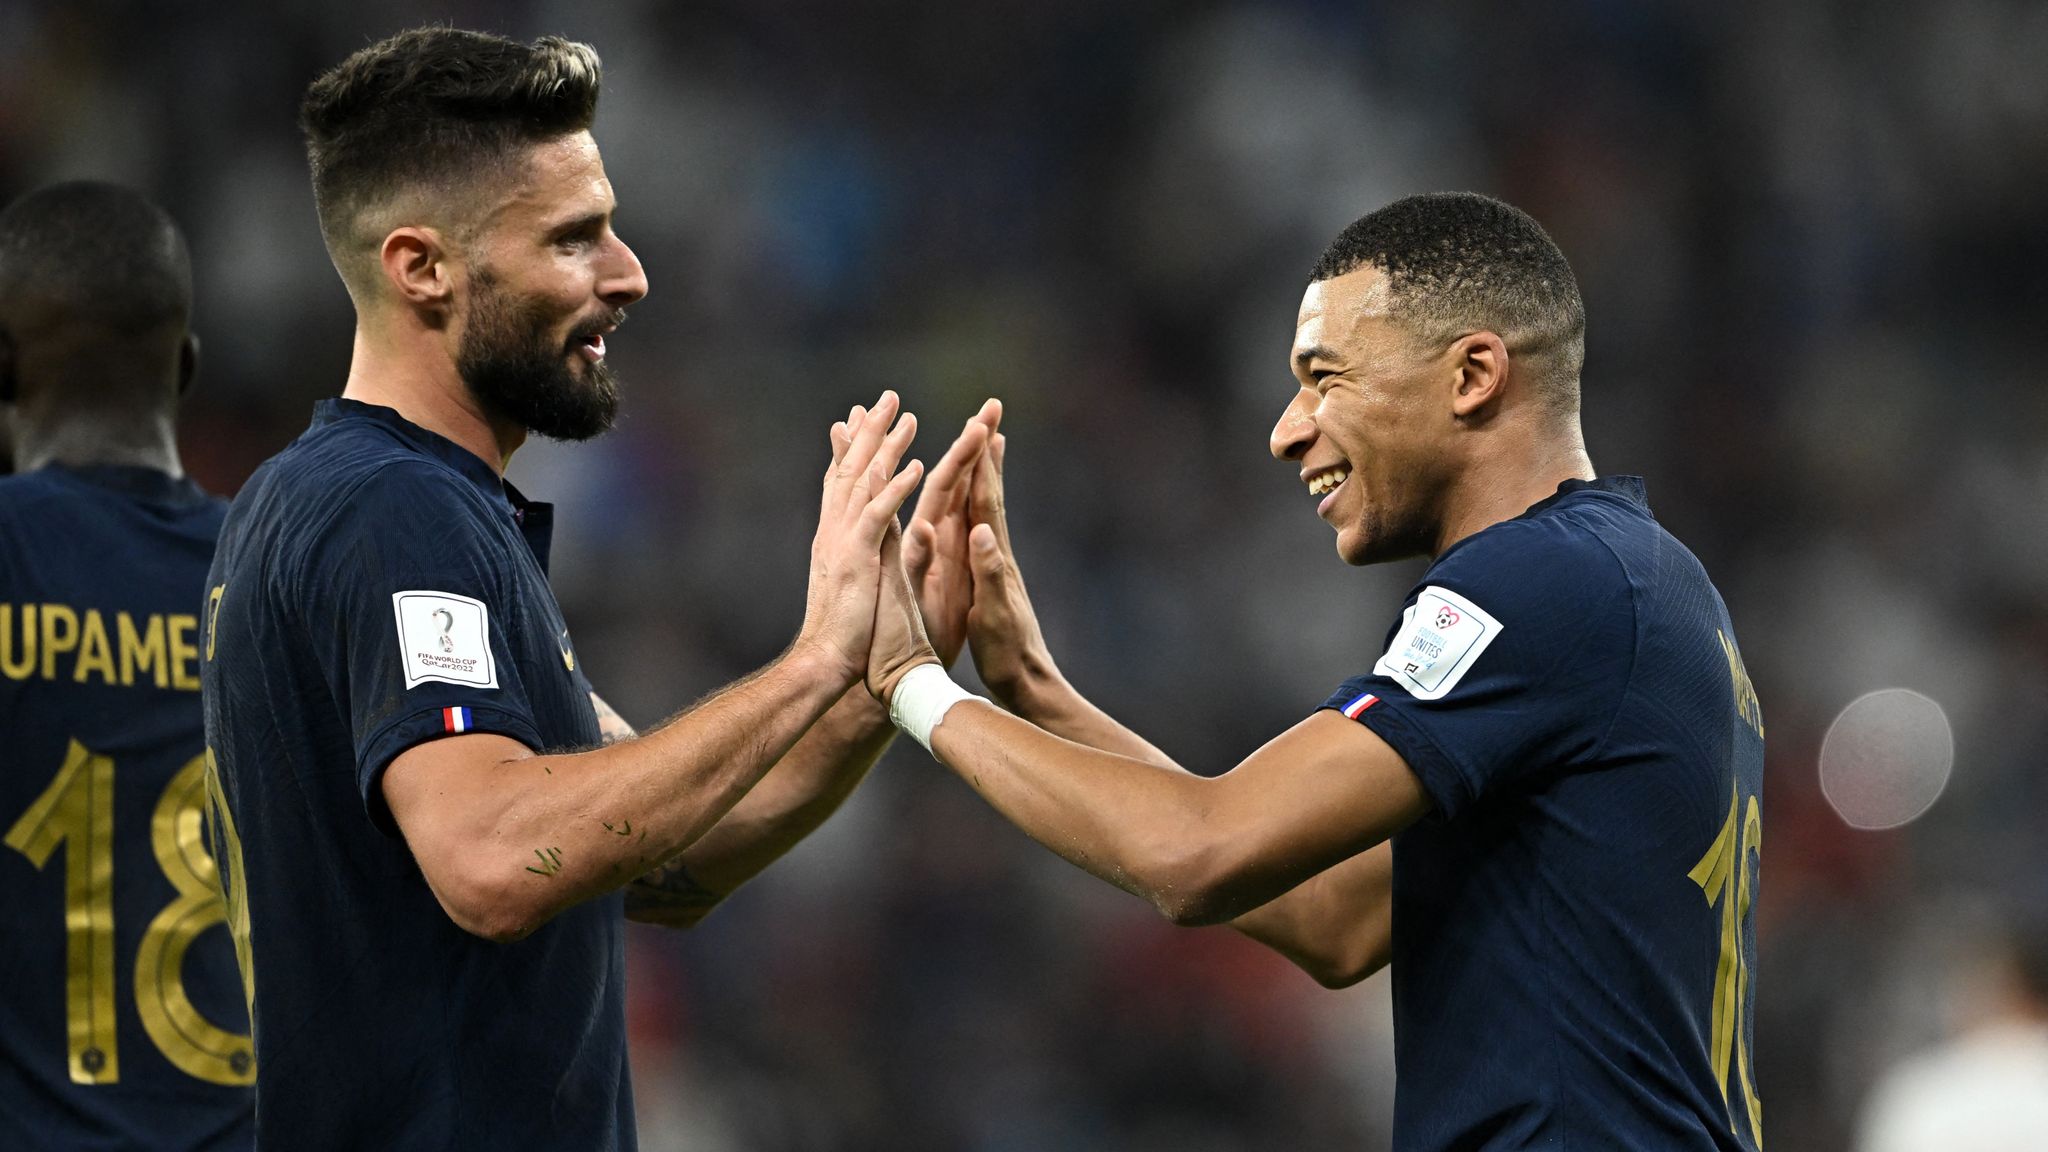 Moments of Sheer Brilliance and Record Goal by Kylian Mbappé and Olivier Giroud Sent Les Bleus to the Quarterfinal, Meets England Next